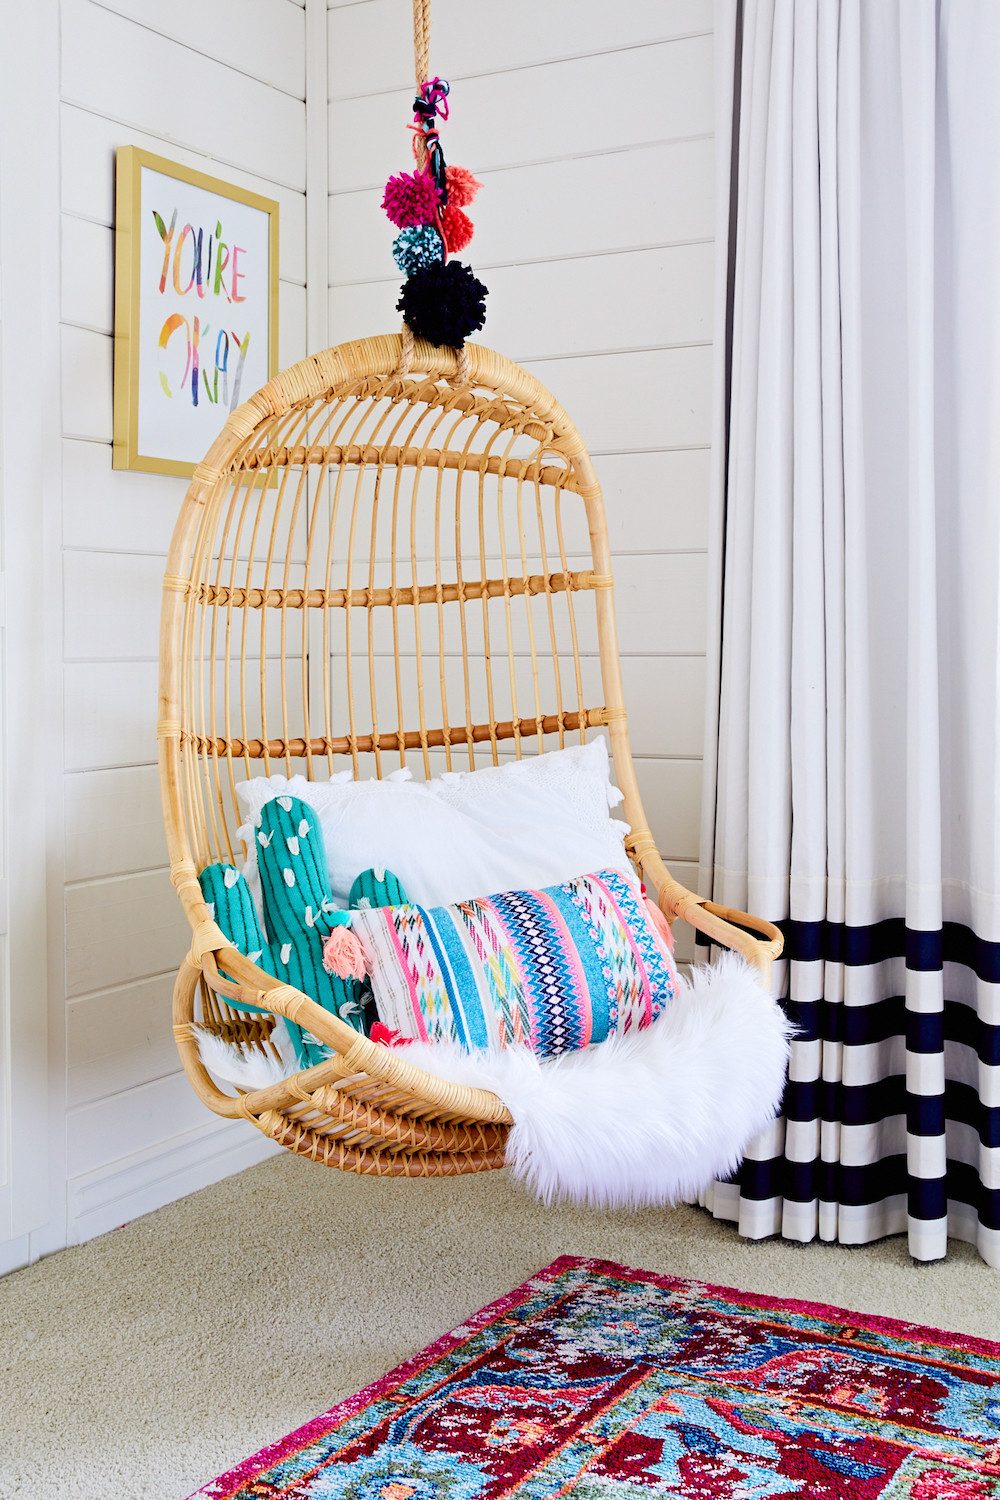 Cool Chairs For Kids Room
 Trendspotting Hanging Chairs are Swinging into Kids